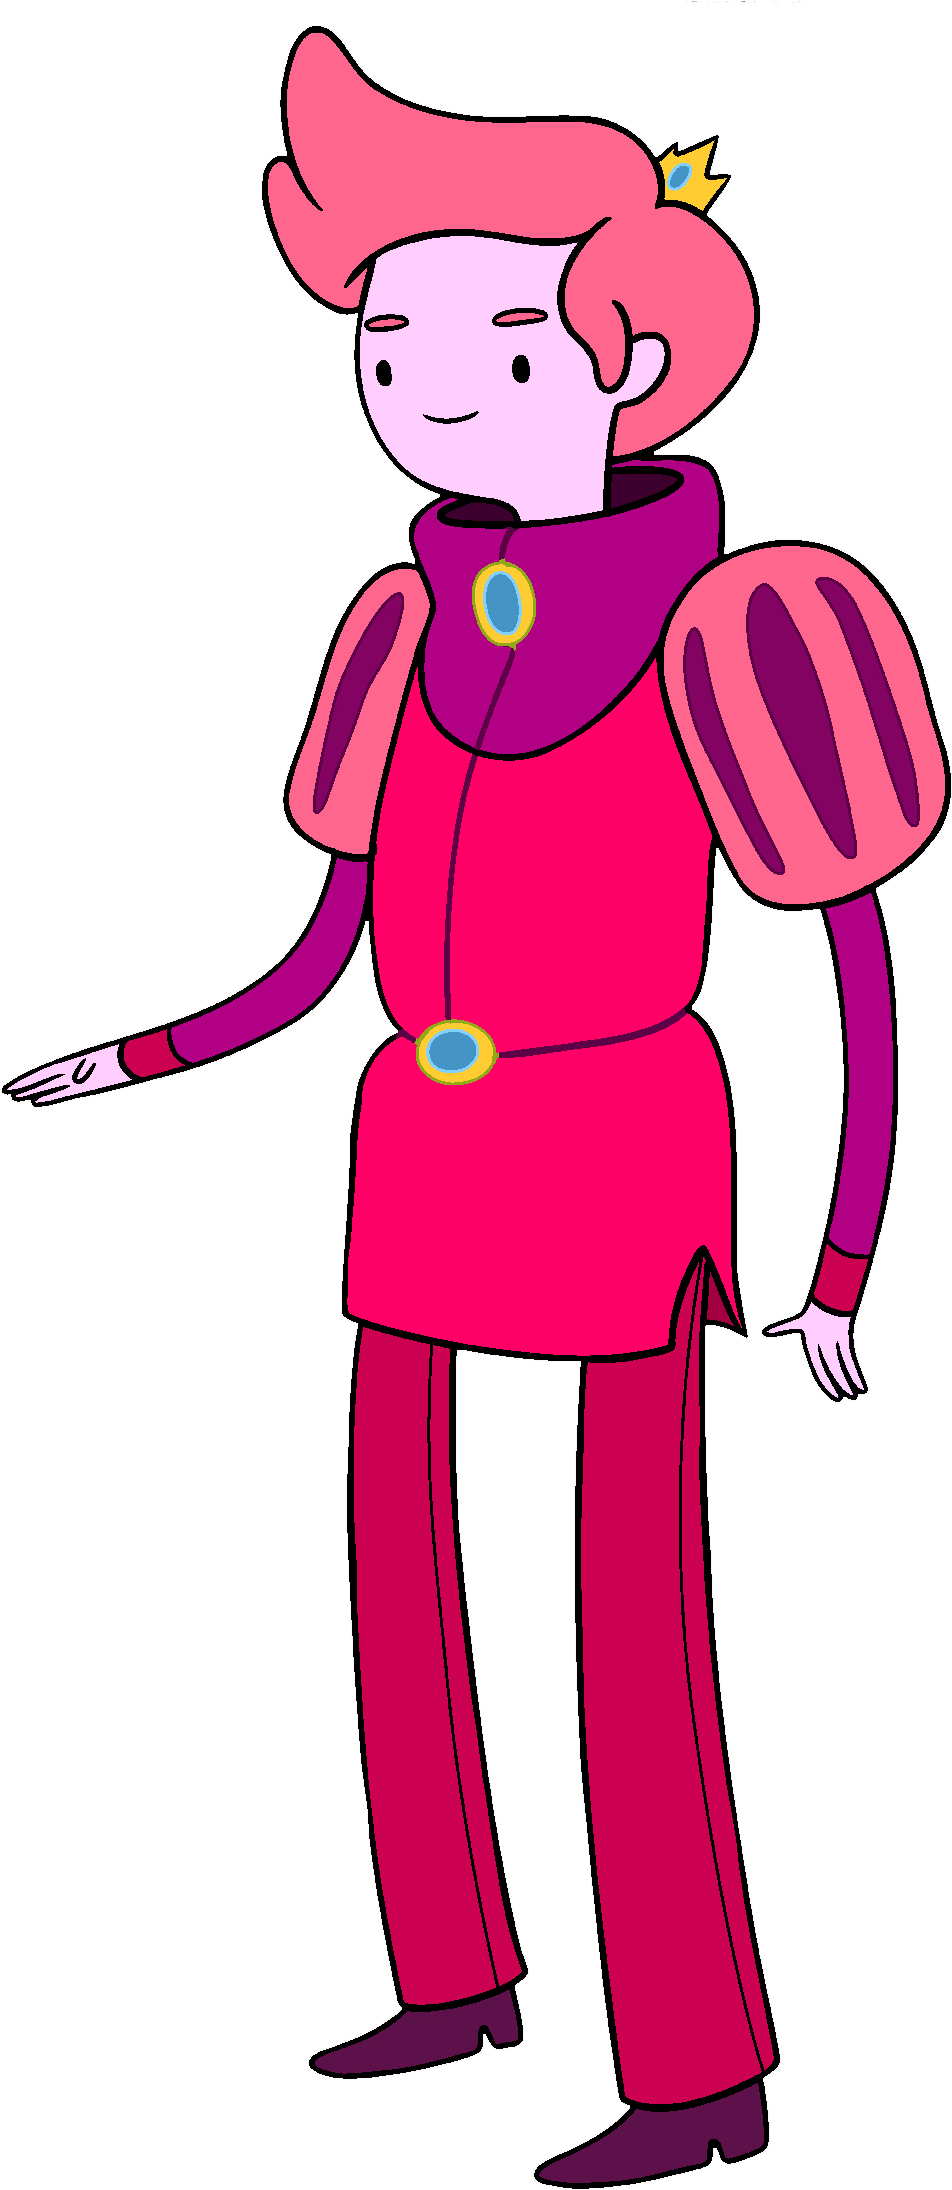 Prince Gumball The Adventure Time Wiki Mathematical